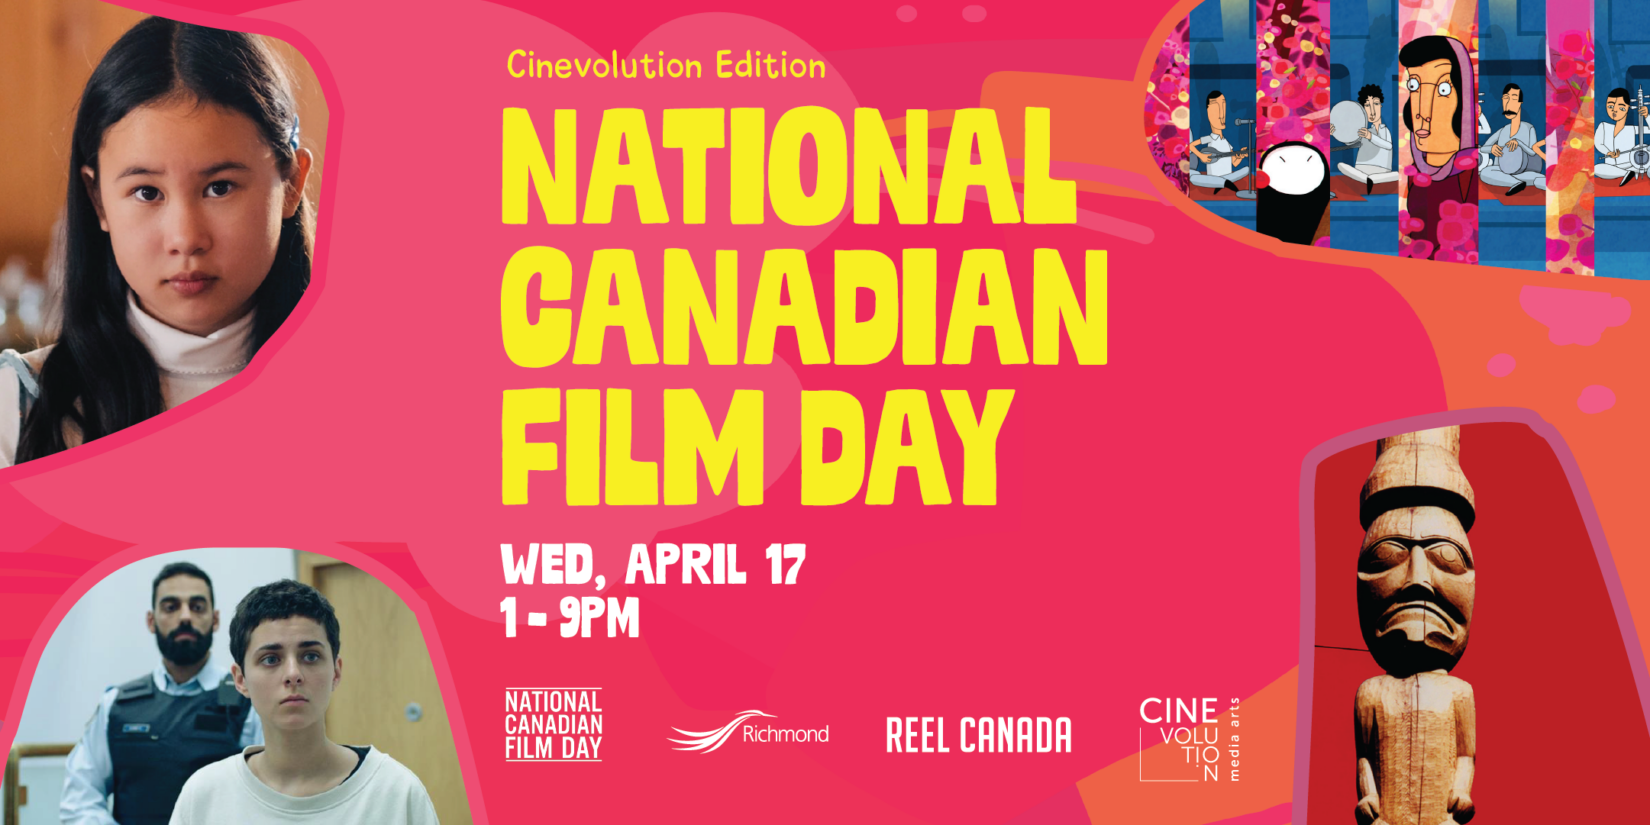 On a bright pink background in bold yellow text "Cinevolution Edition, National Canadian Film Day." In white text below, "Wed, April 17, 1-9pm." Still images from four different films appear in irregular shapes scattered playfully across the colourful background. 